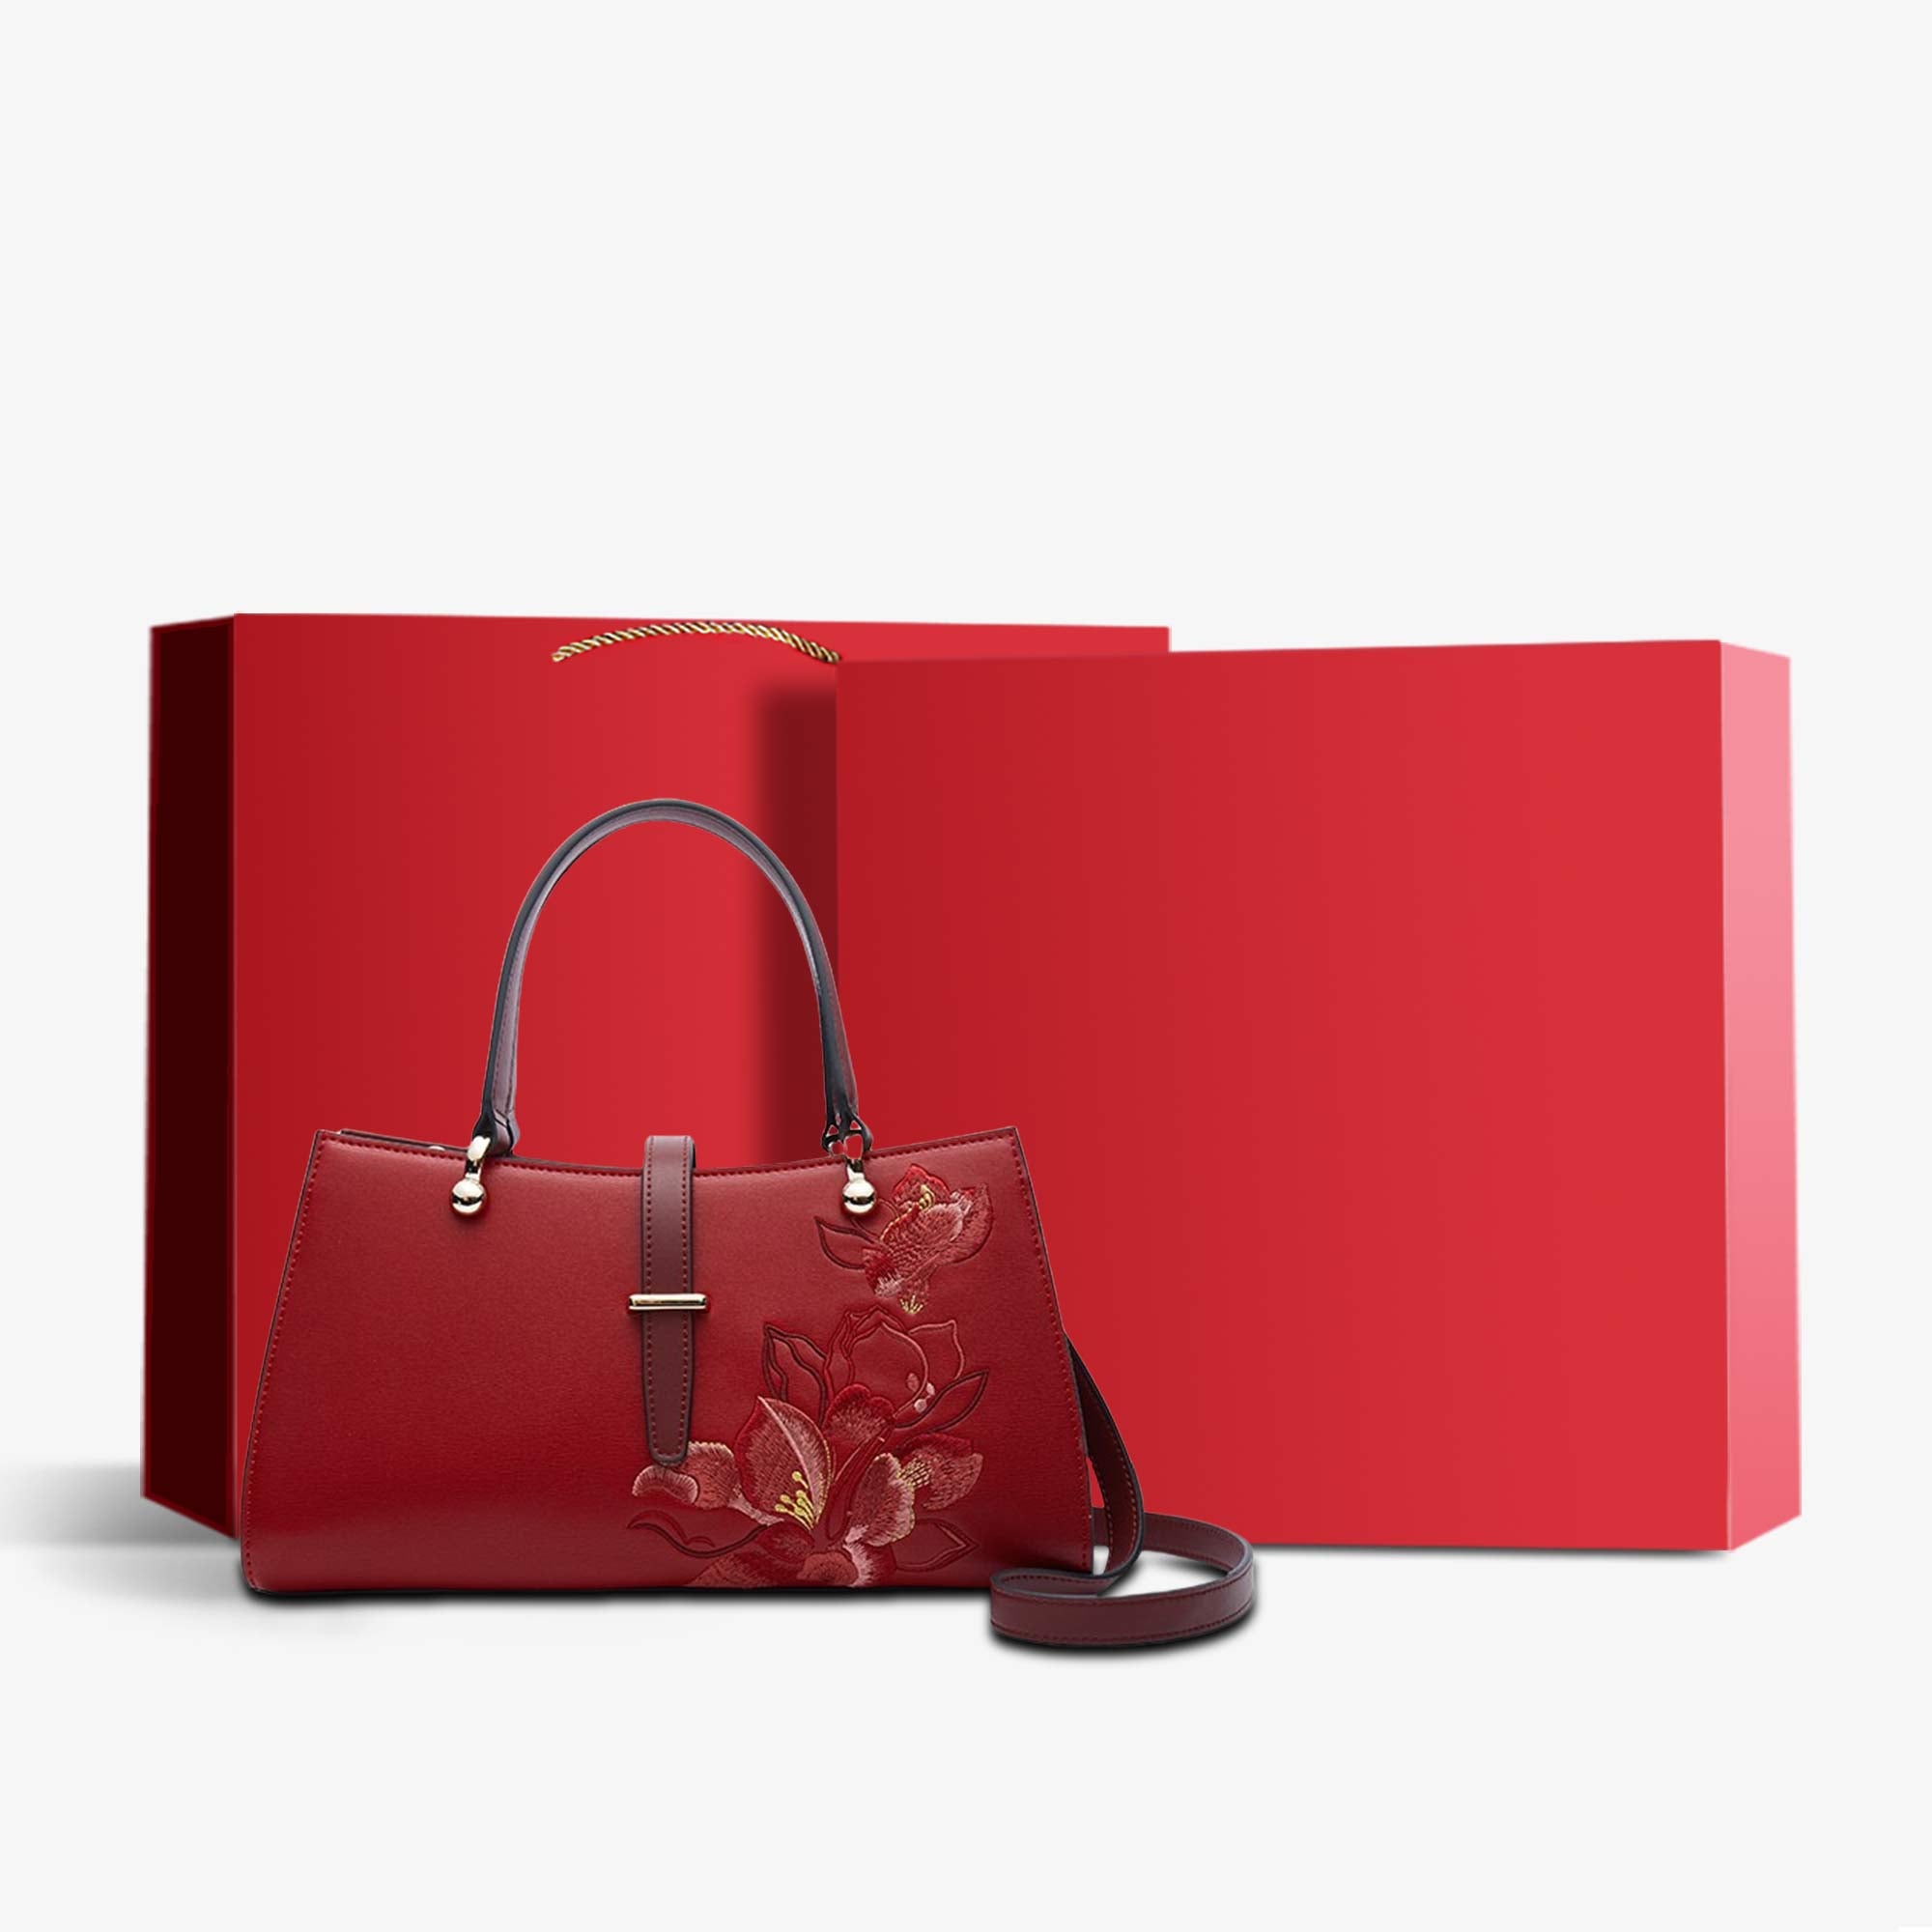 Embroidery Leather Red Magnolia Women's Handbag-Tote Bag-SinoCultural-Red-Bag with Gift Box-P220237-g-SinoCultural